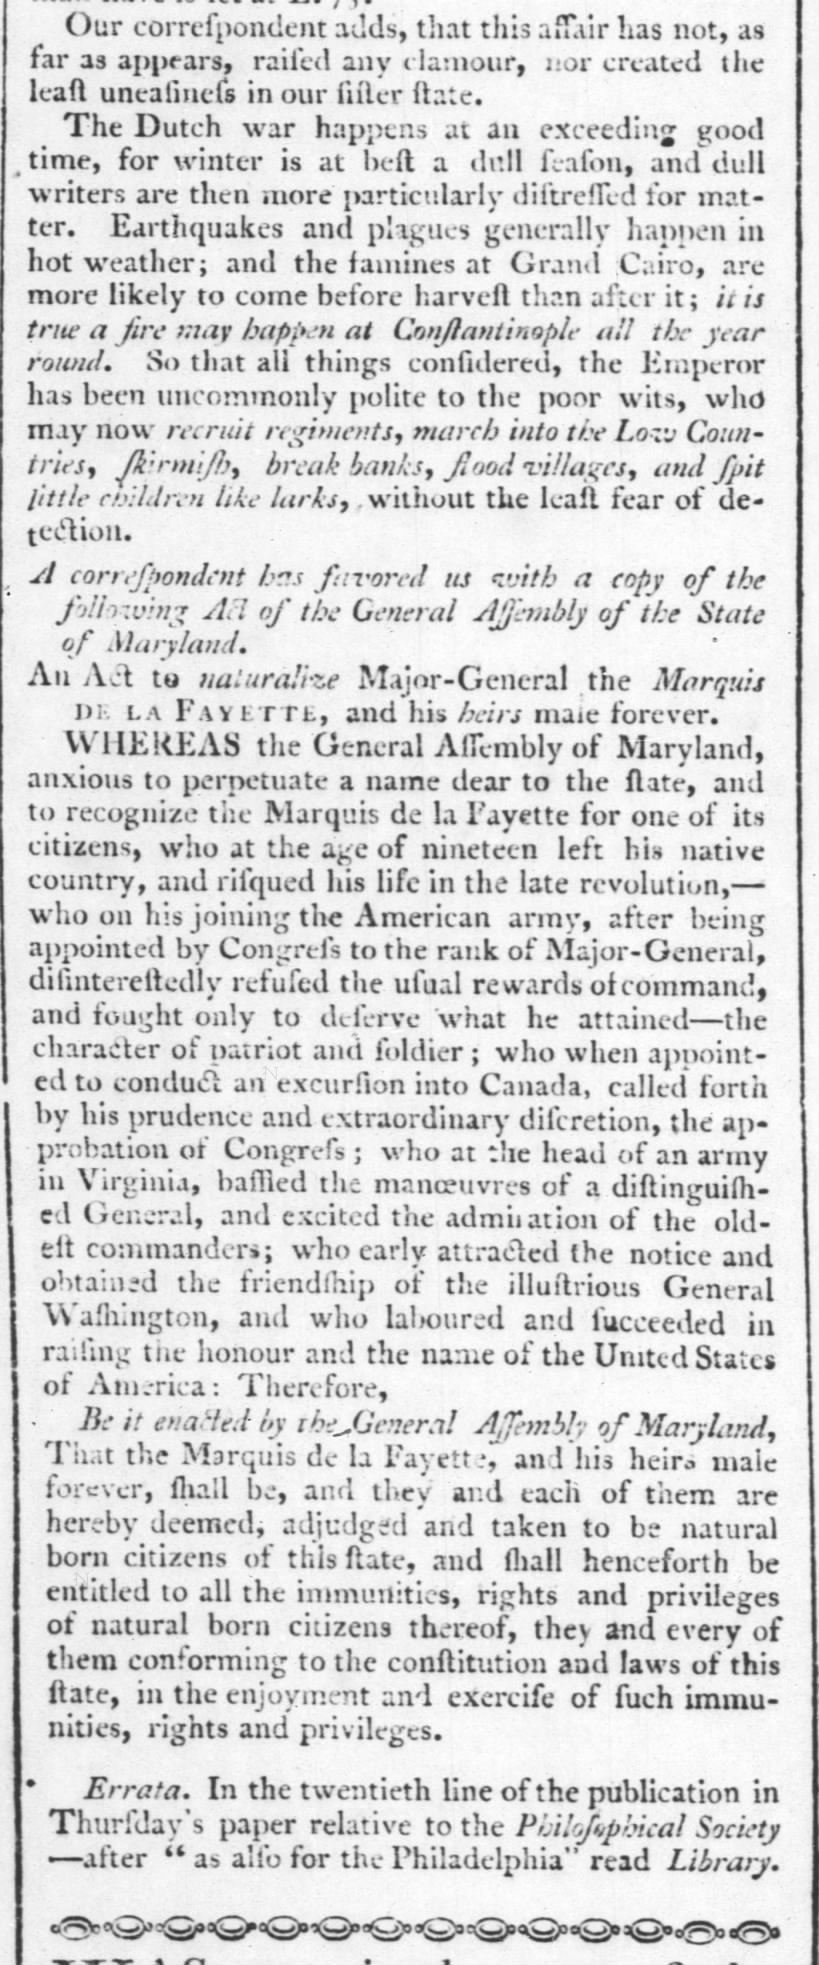 Frenchman given natural born status by Maryland 1785